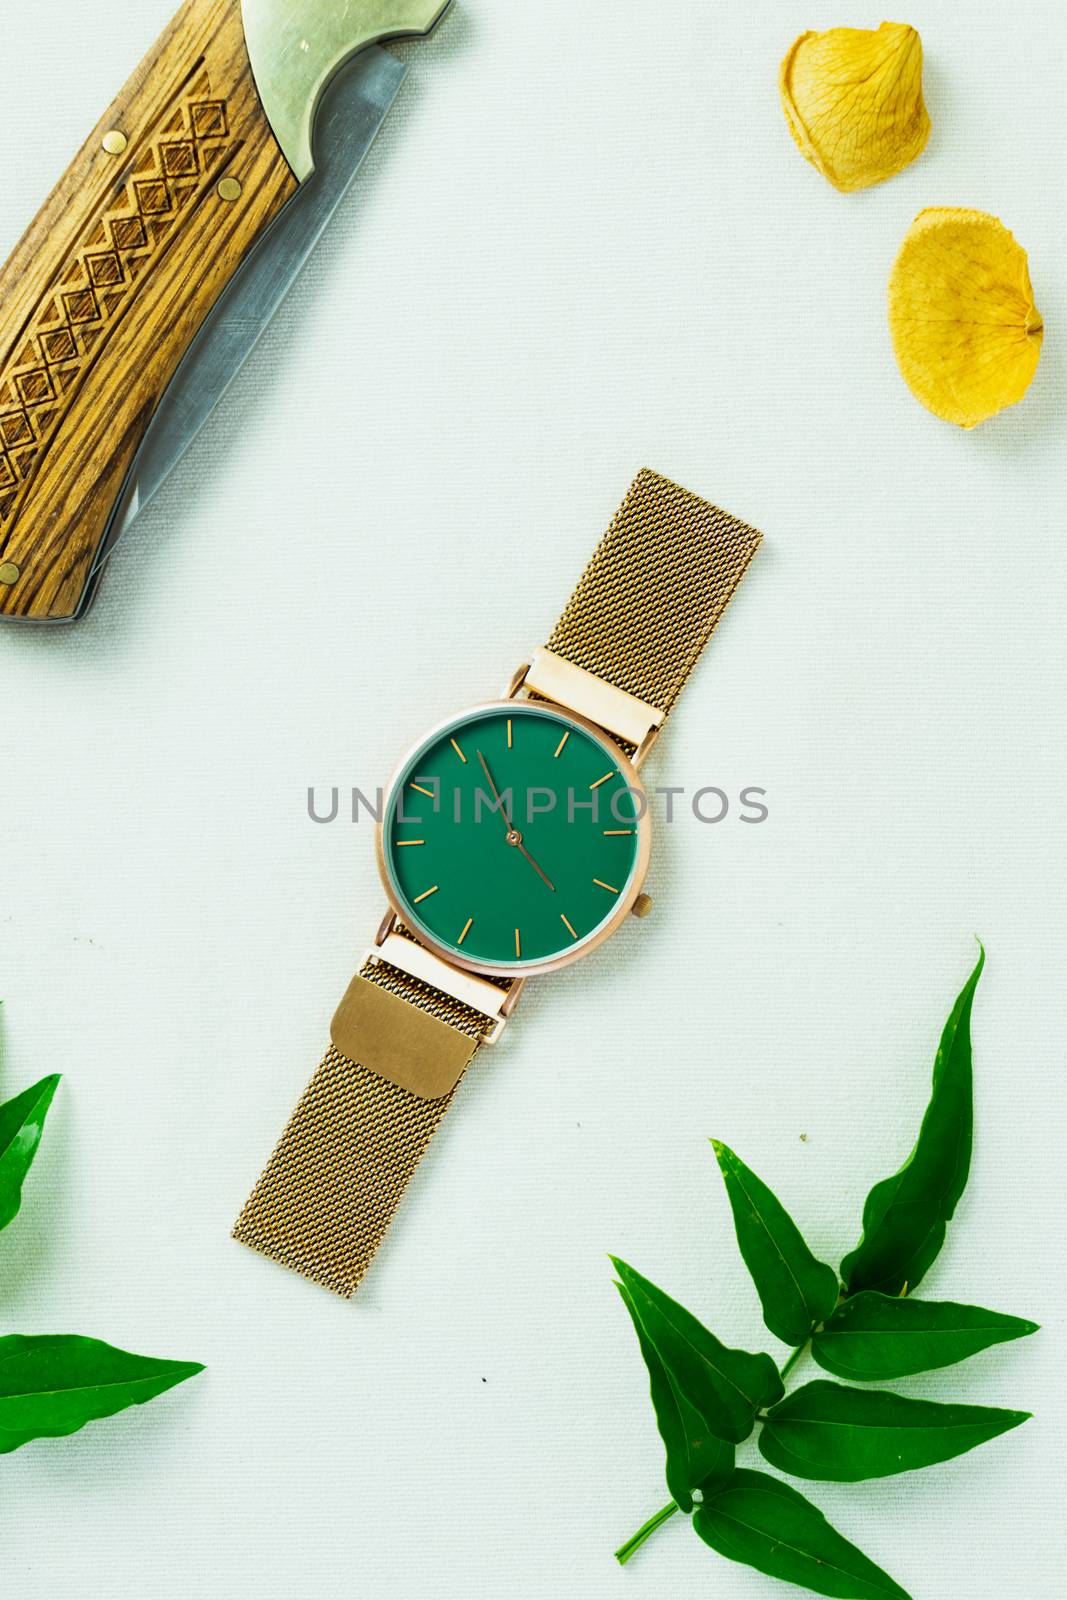 Closeup minimal fashion wristwatch for unisex on white background with flowers